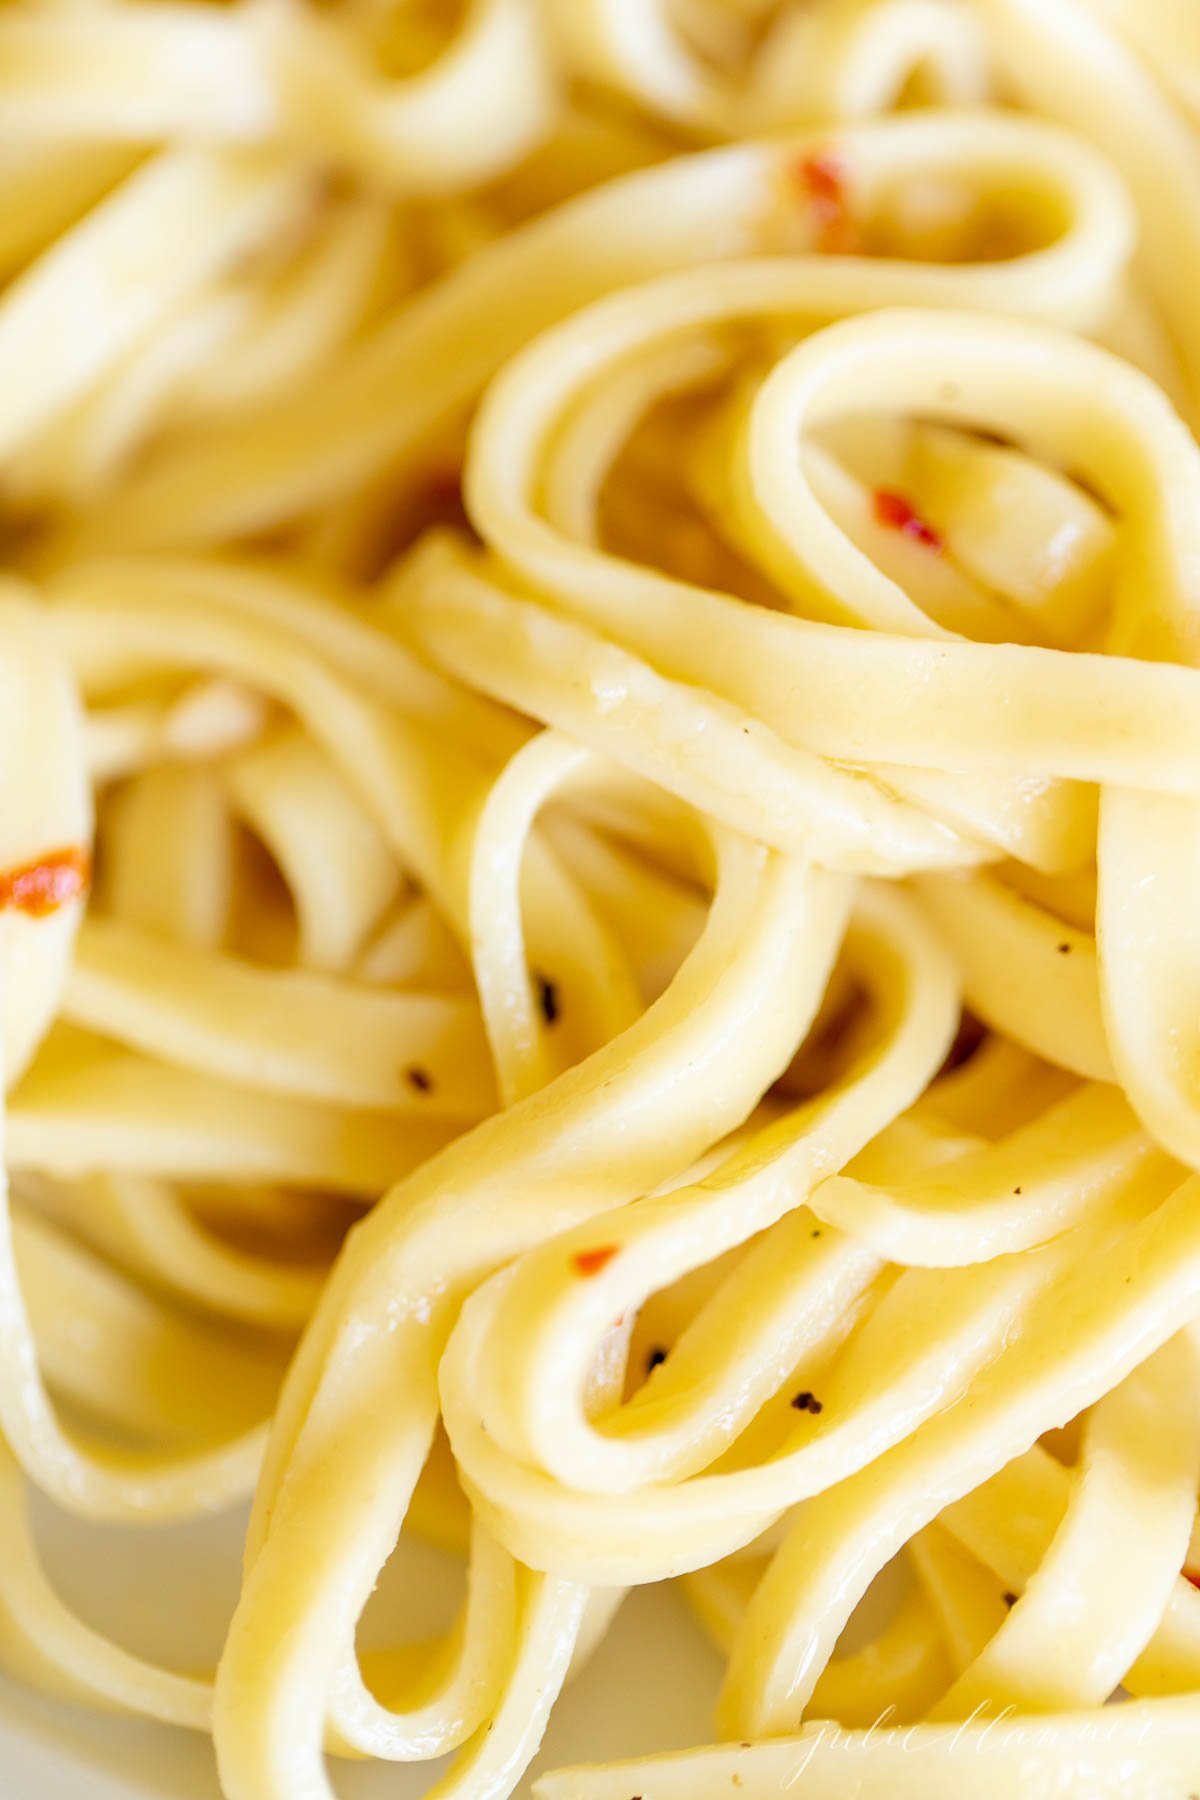 A close up of cooked linguine pasta noodles.